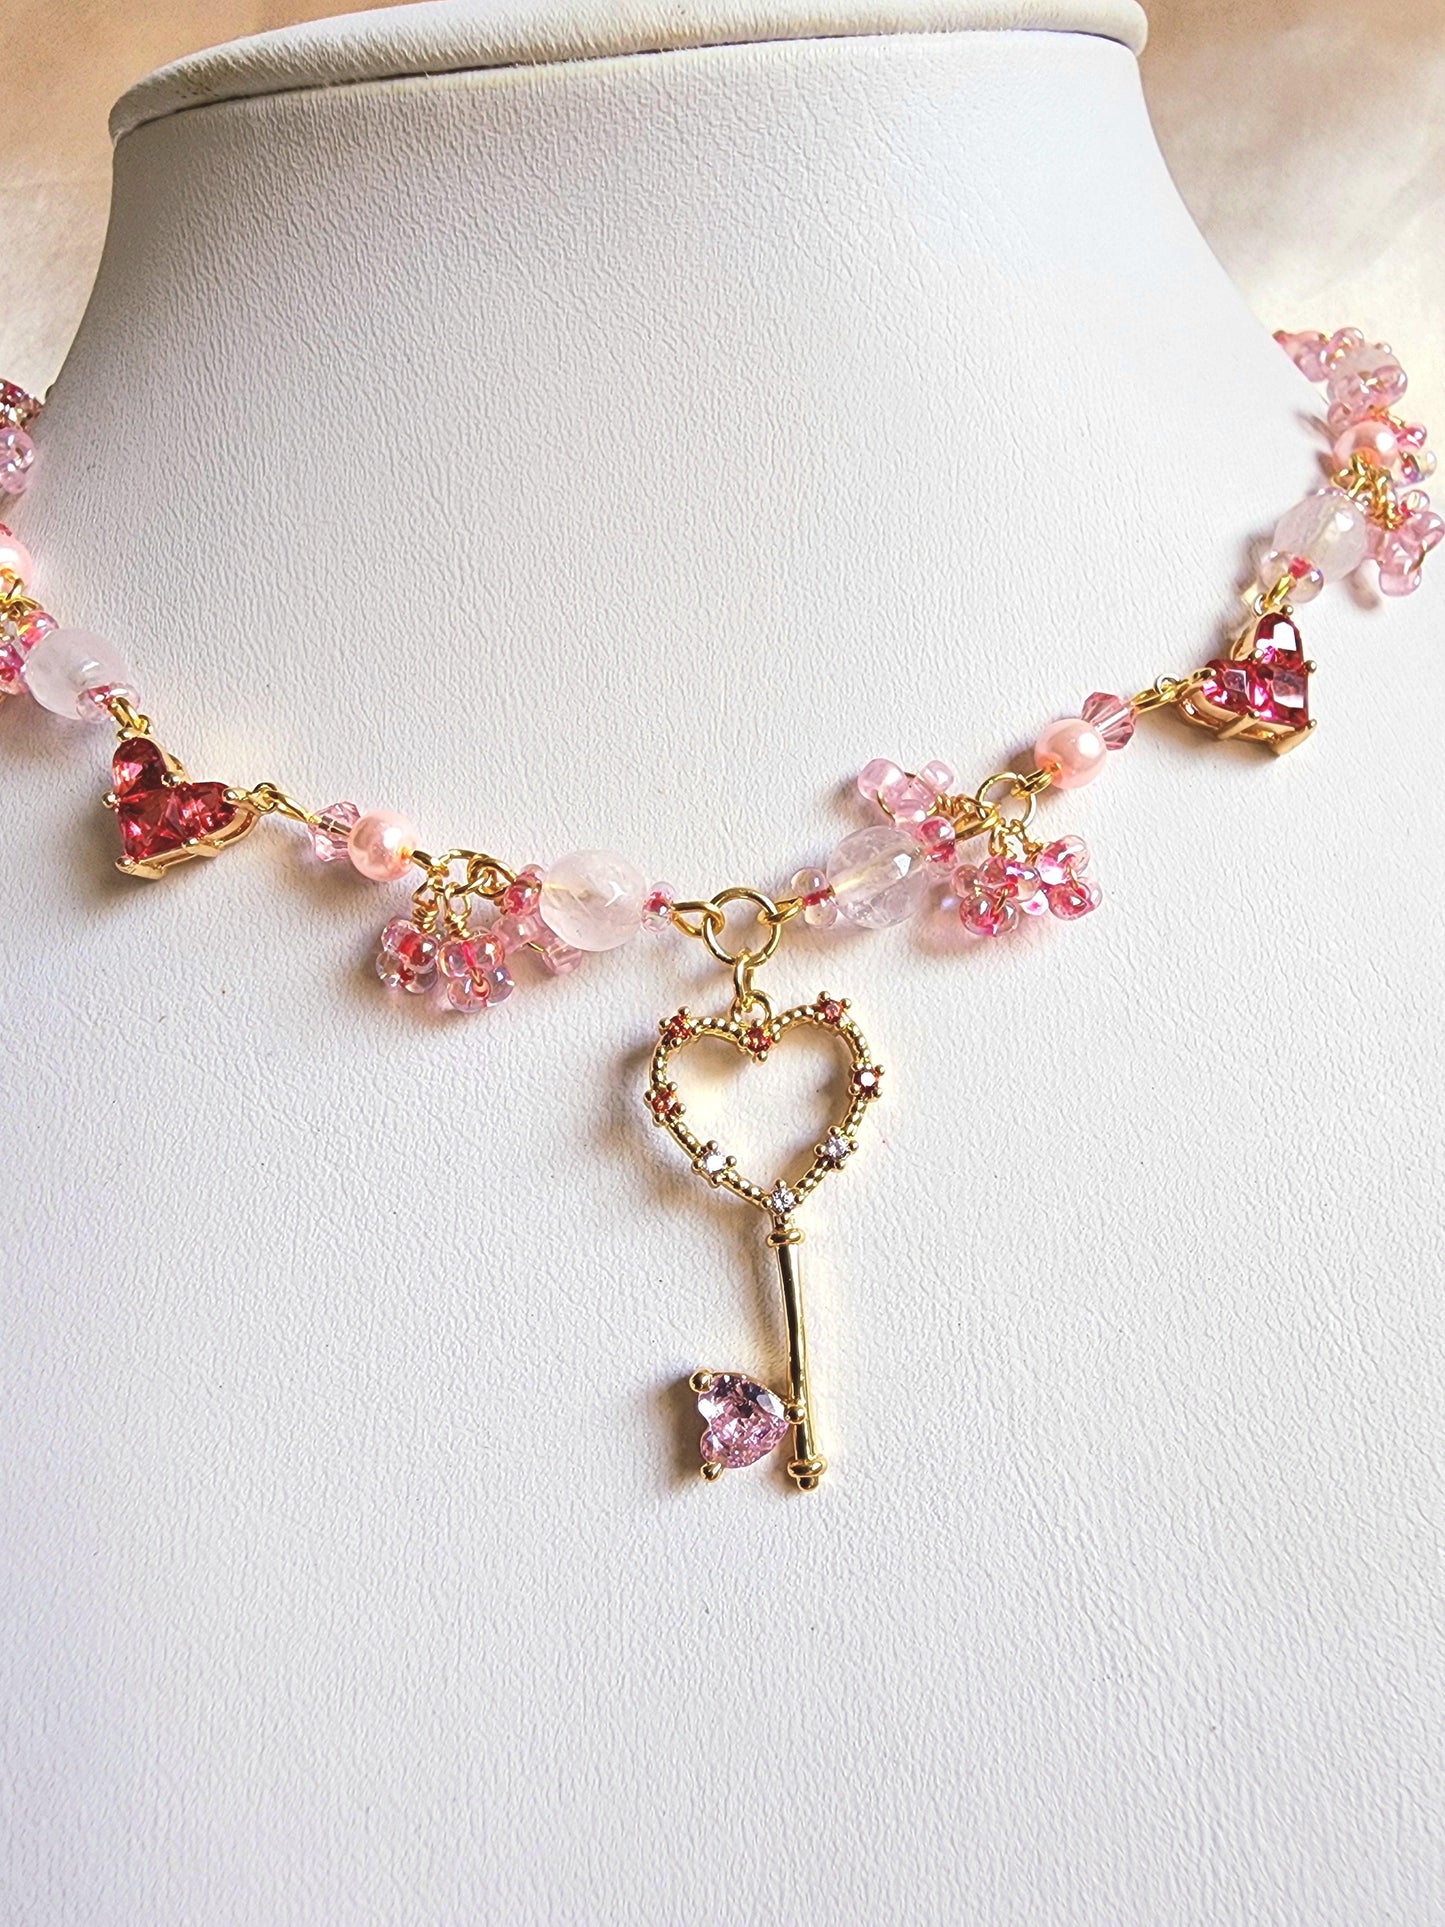 Key to Love Necklace - By Cocoyu